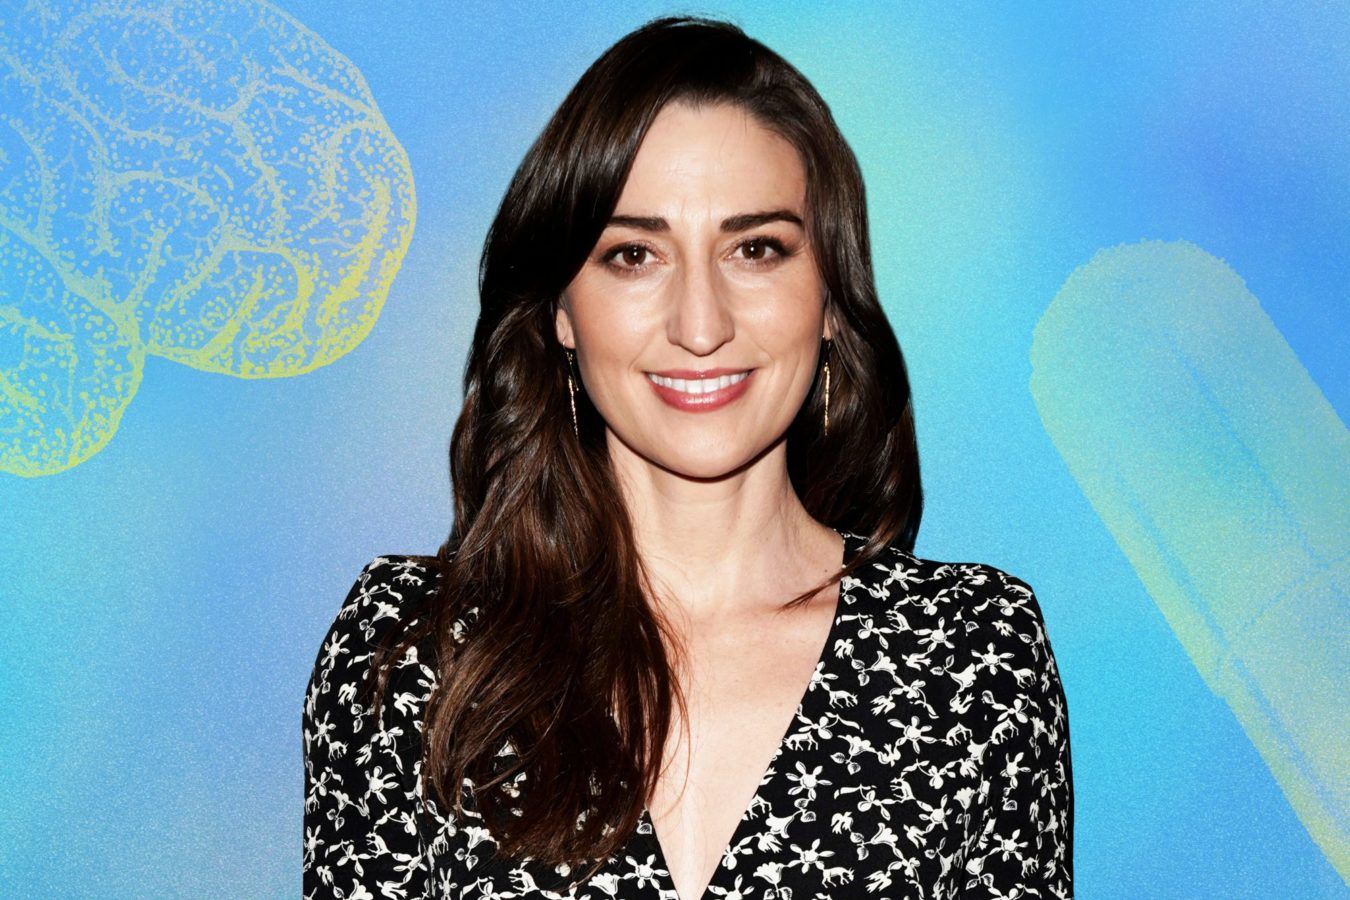 Sara Bareilles on how starting psychiatric medication helped her ‘see’ herself again